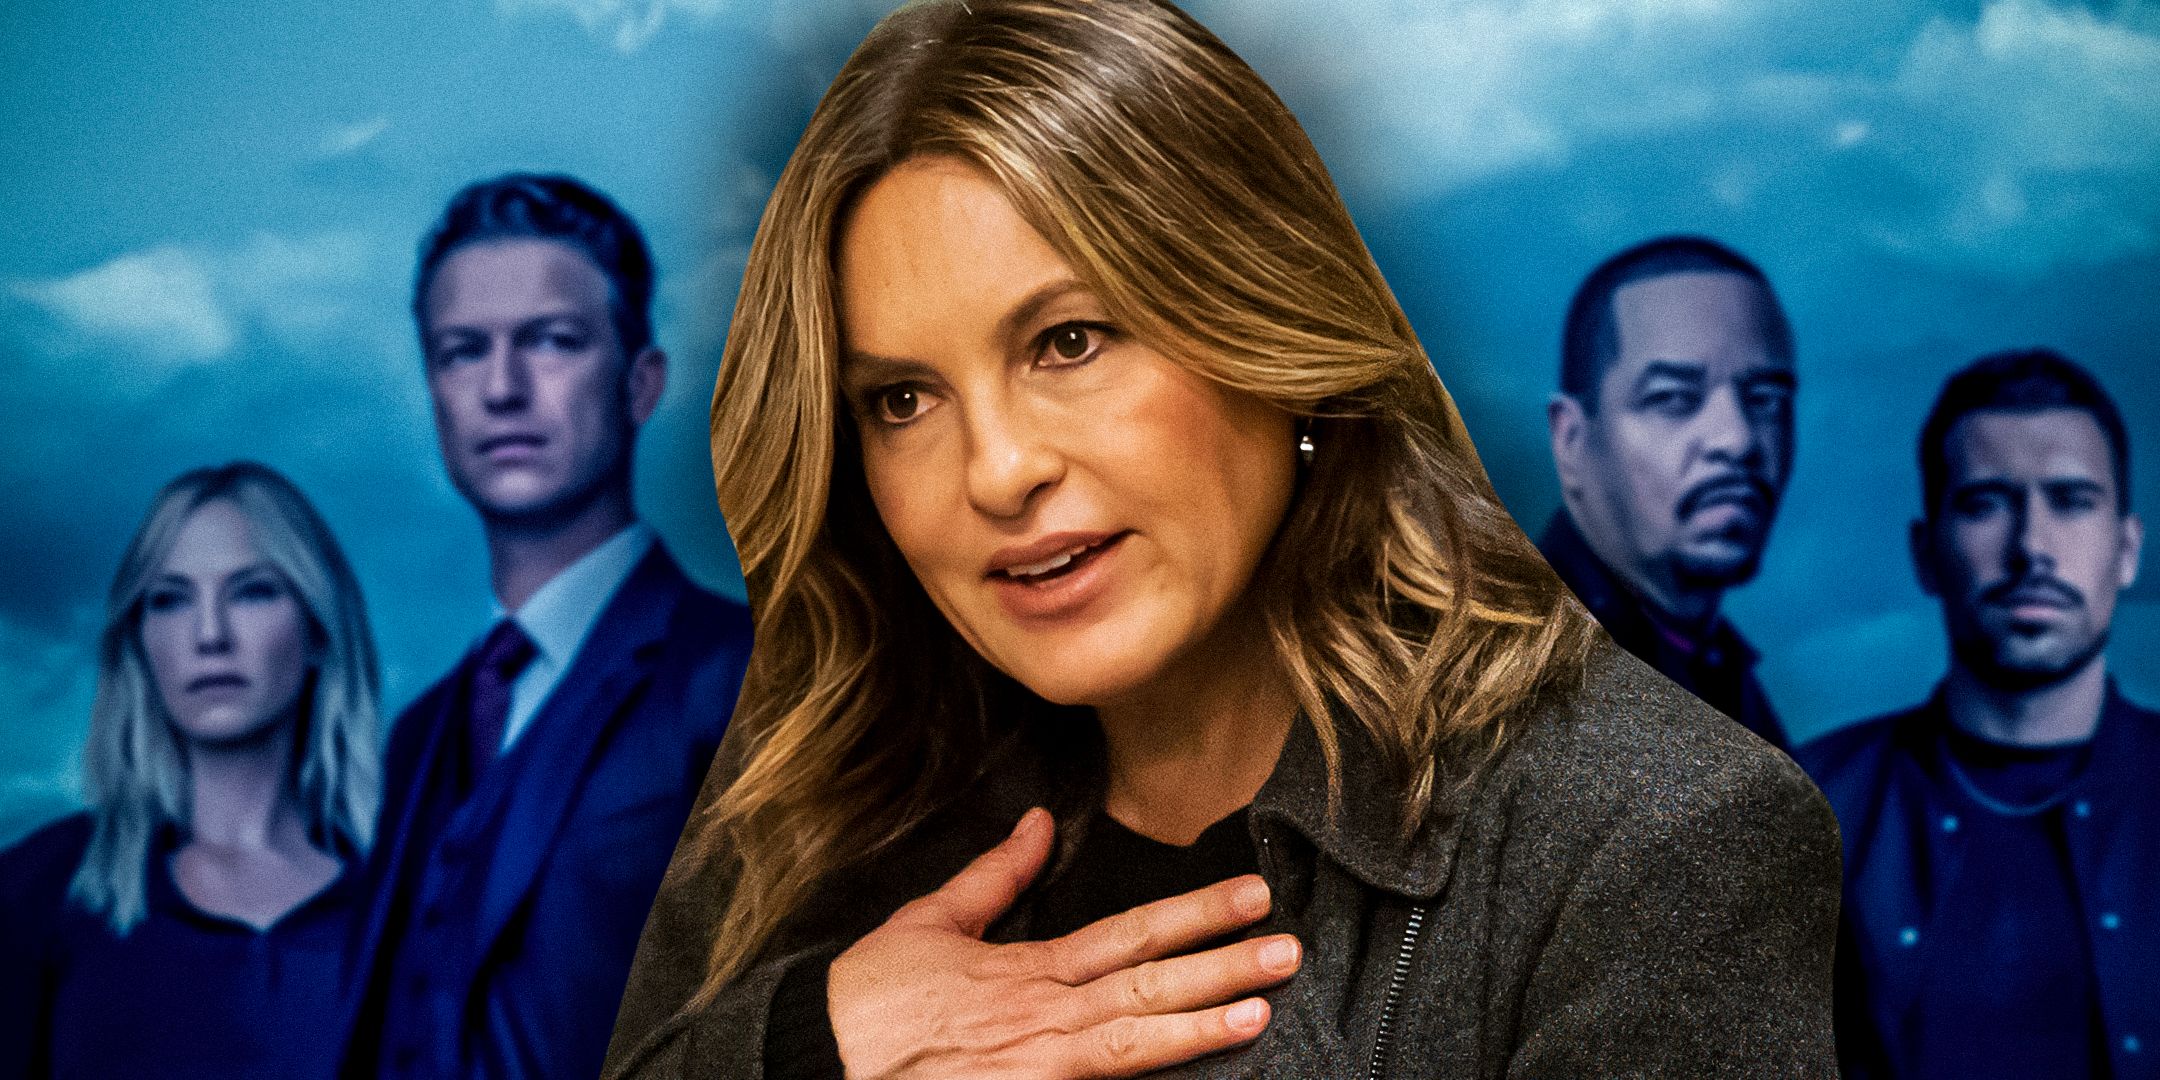 Mariska Hargitay from Law & Order: SVU holding her hand to her heart. Carisi and Fin are in the background.